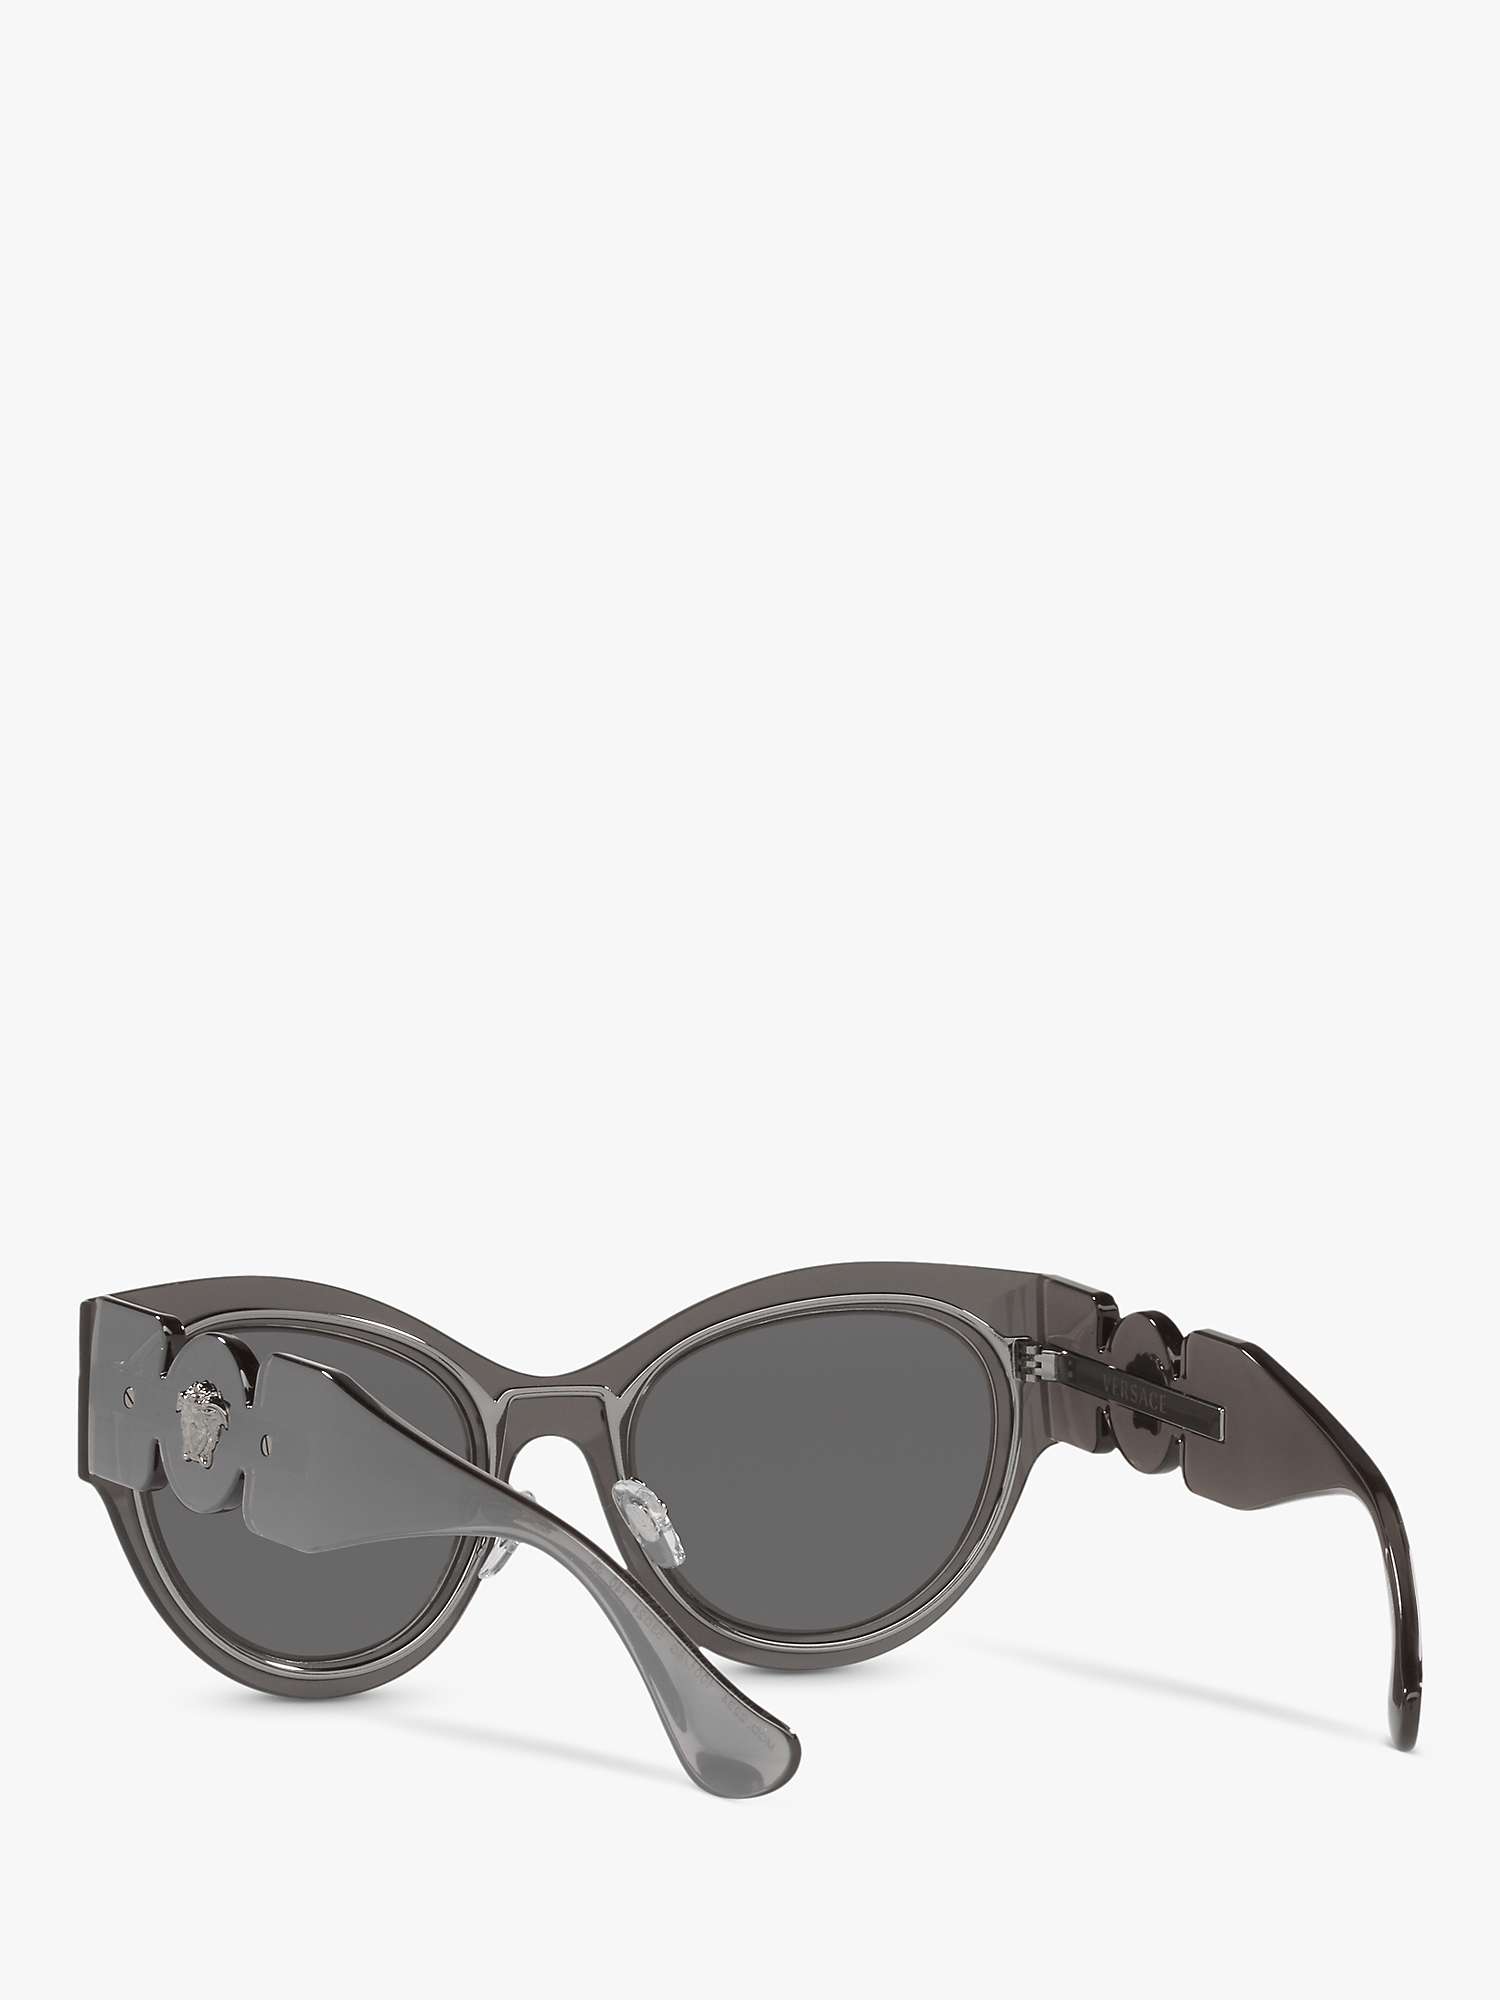 Buy Versace VE2234 Women's Butterfly Sunglasses, Transparent Grey/Mirror Silver Online at johnlewis.com